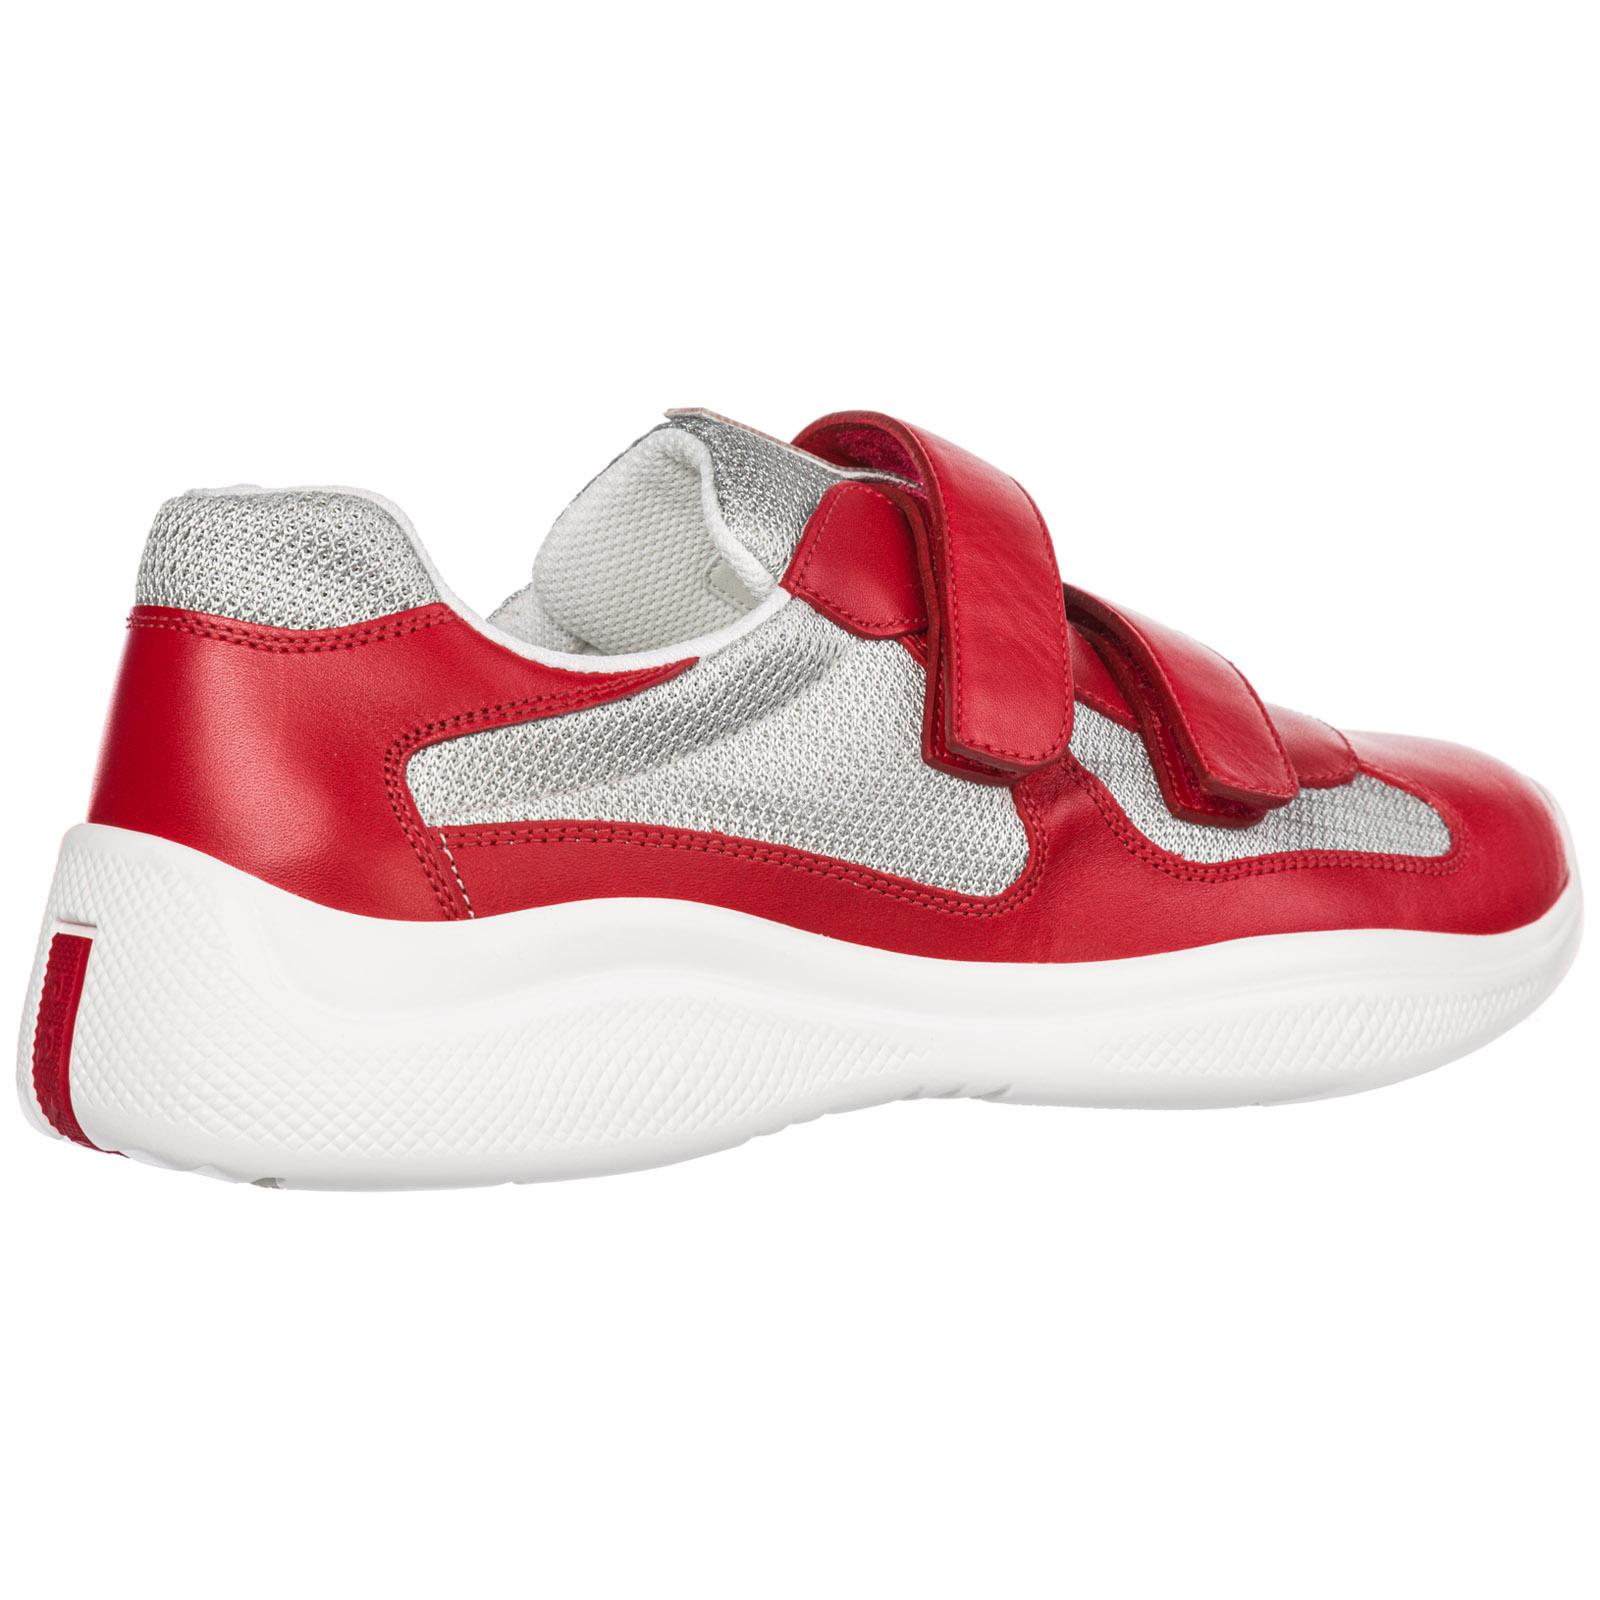 Prada Men's Shoes Leather Trainers Sneakers in Red/Silver (Red) for Men -  Save 67% - Lyst